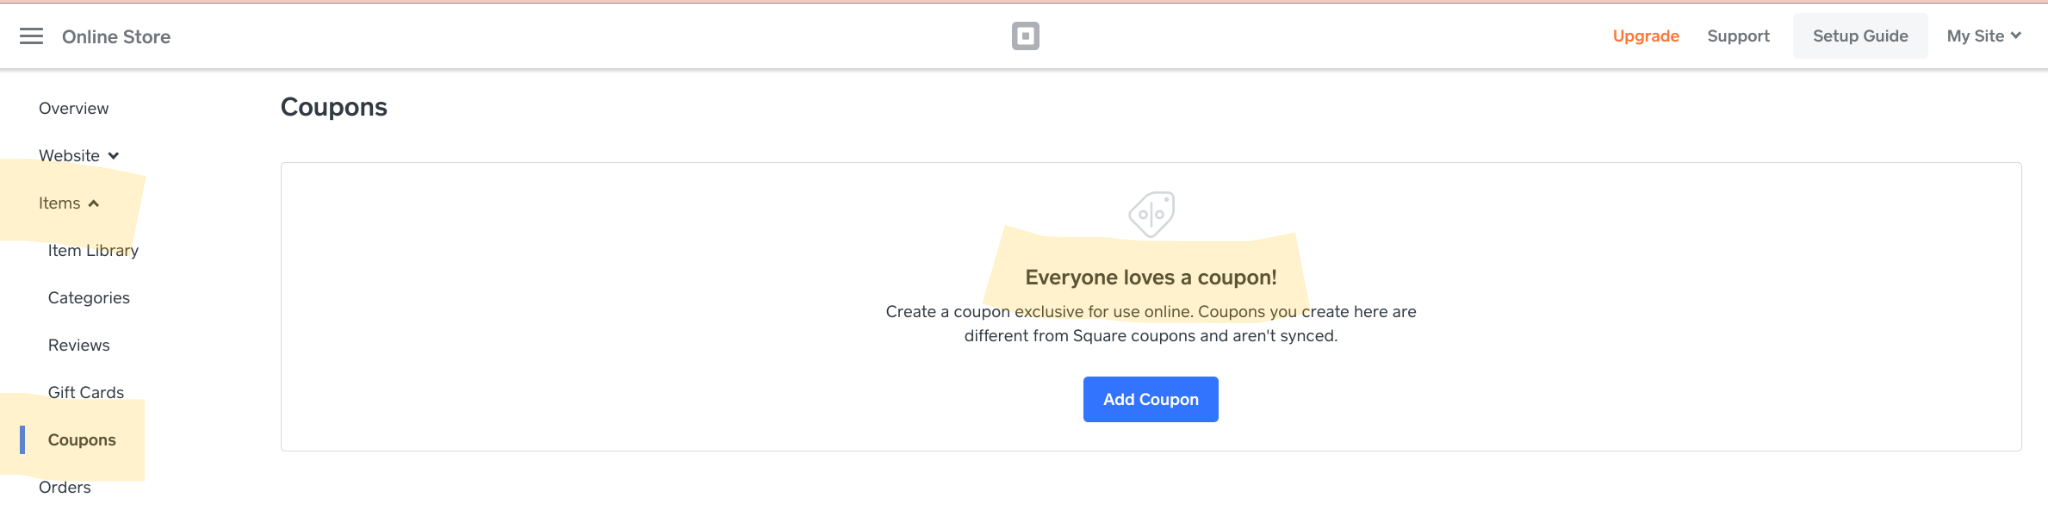 How to Use a Coupon Code on